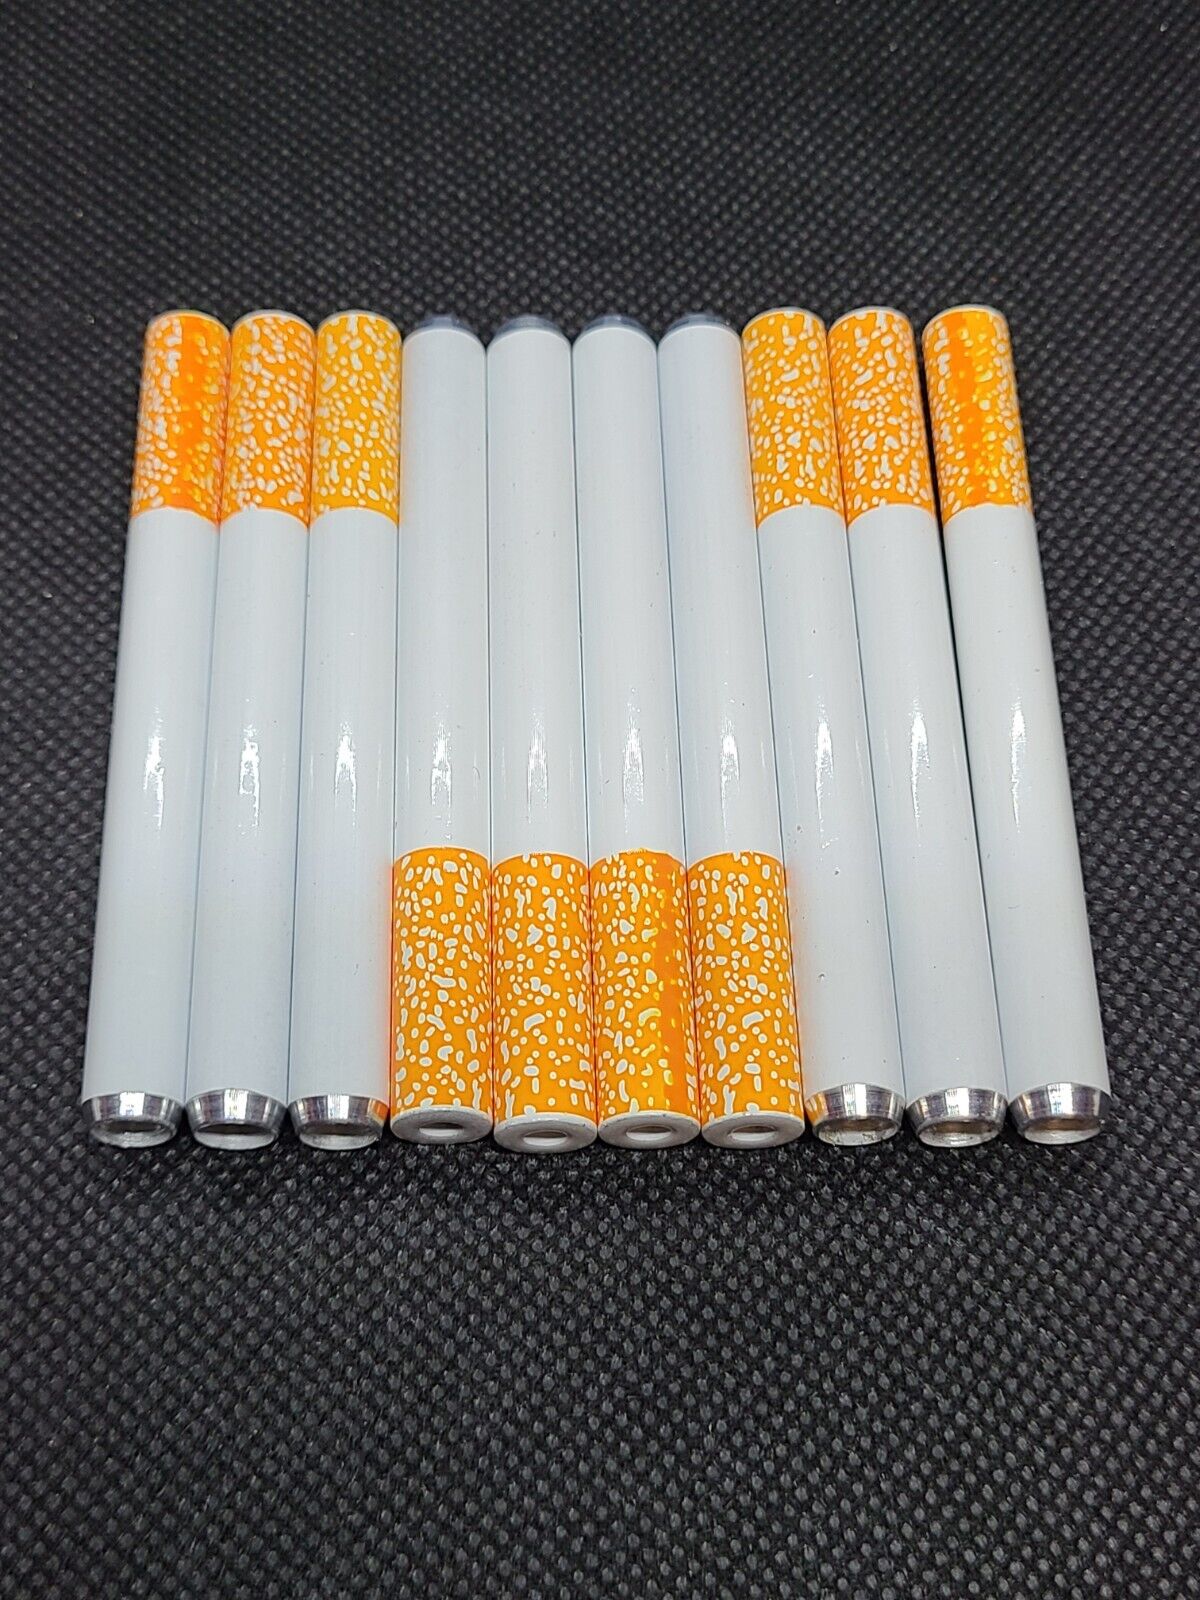 10x Metal One Hitter Pipe Cigarette Style Dugout Bat Large 3\